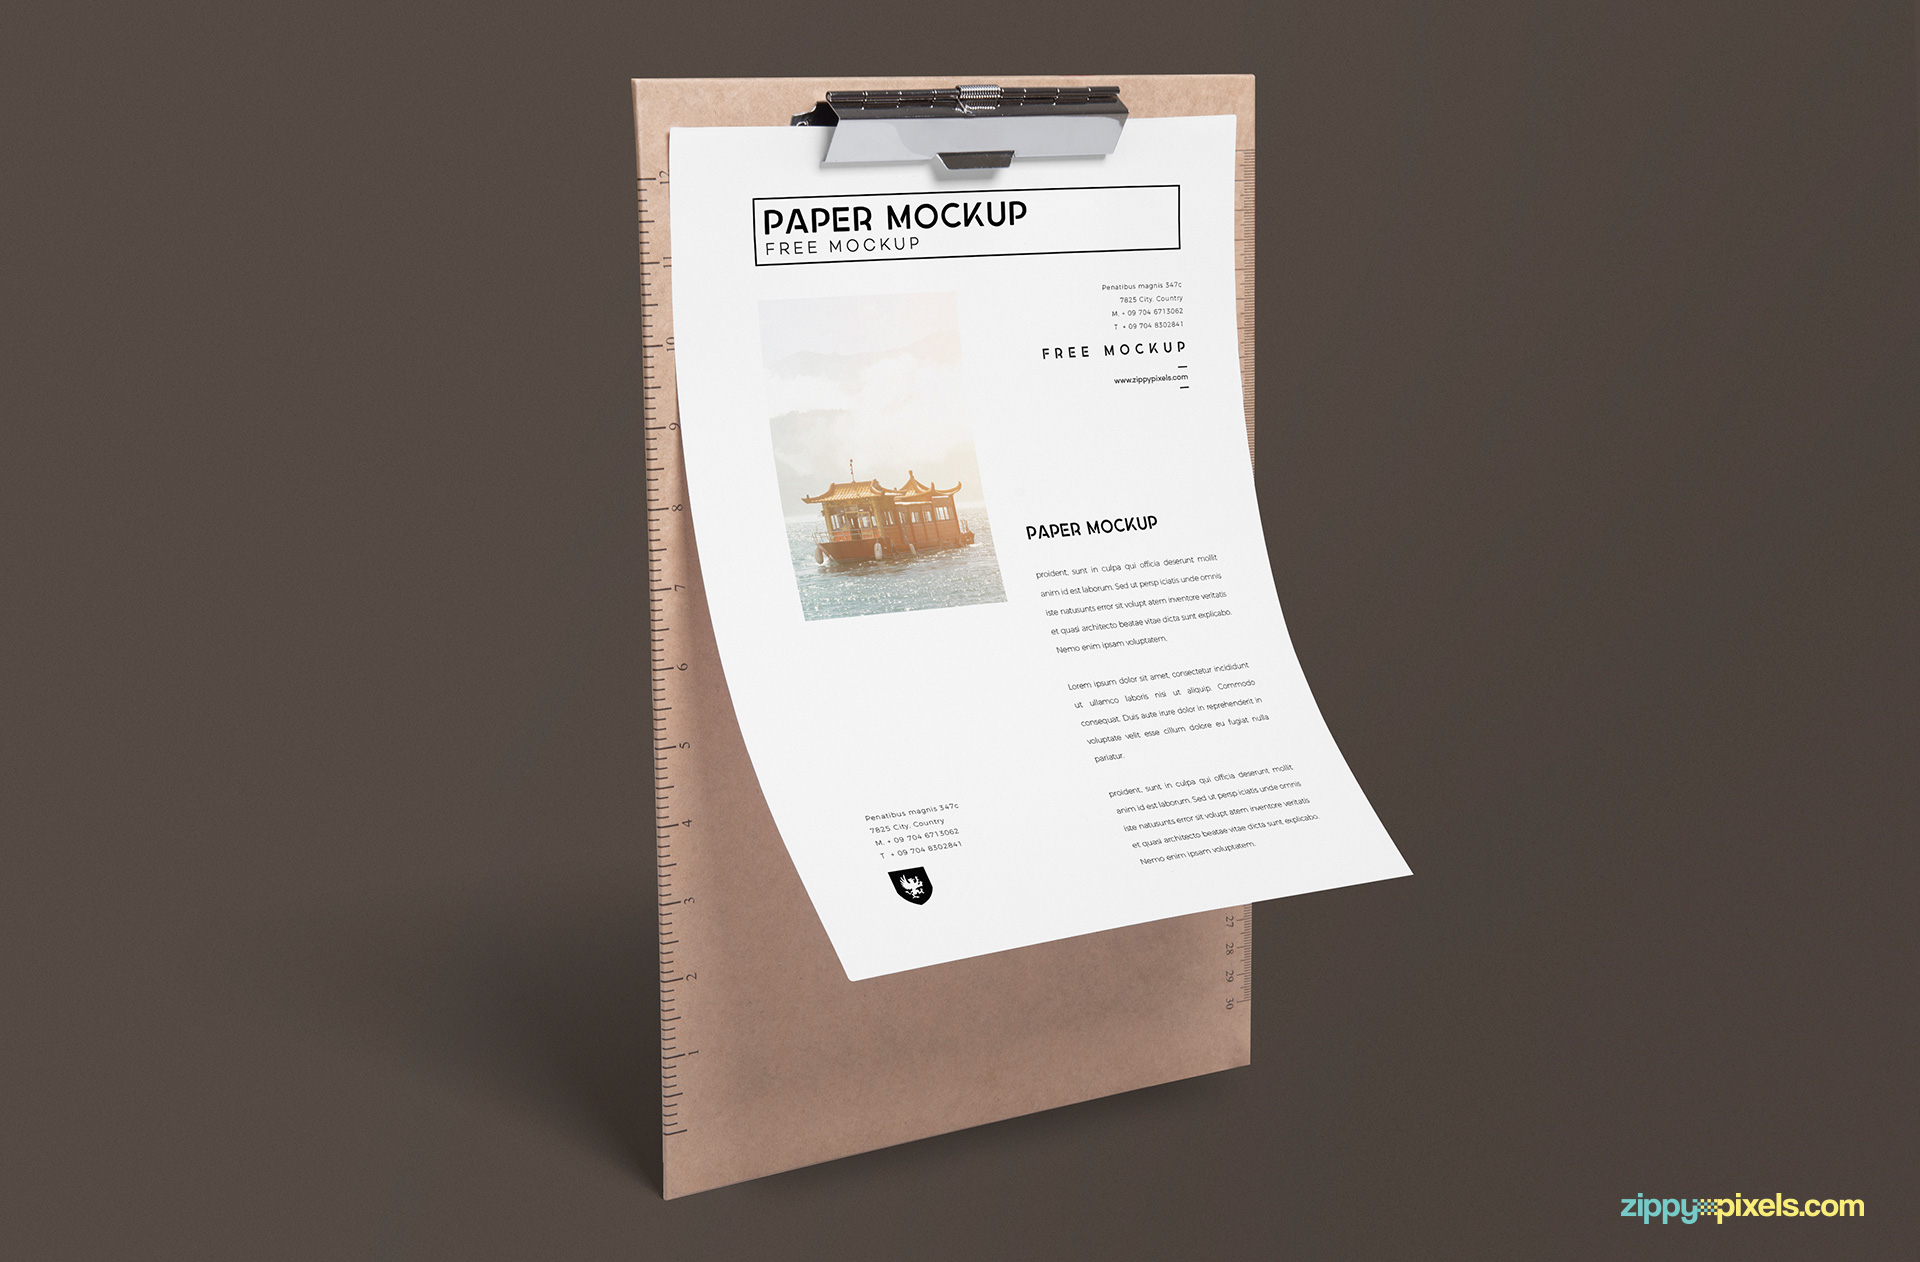 Free paper mockup in standing position.